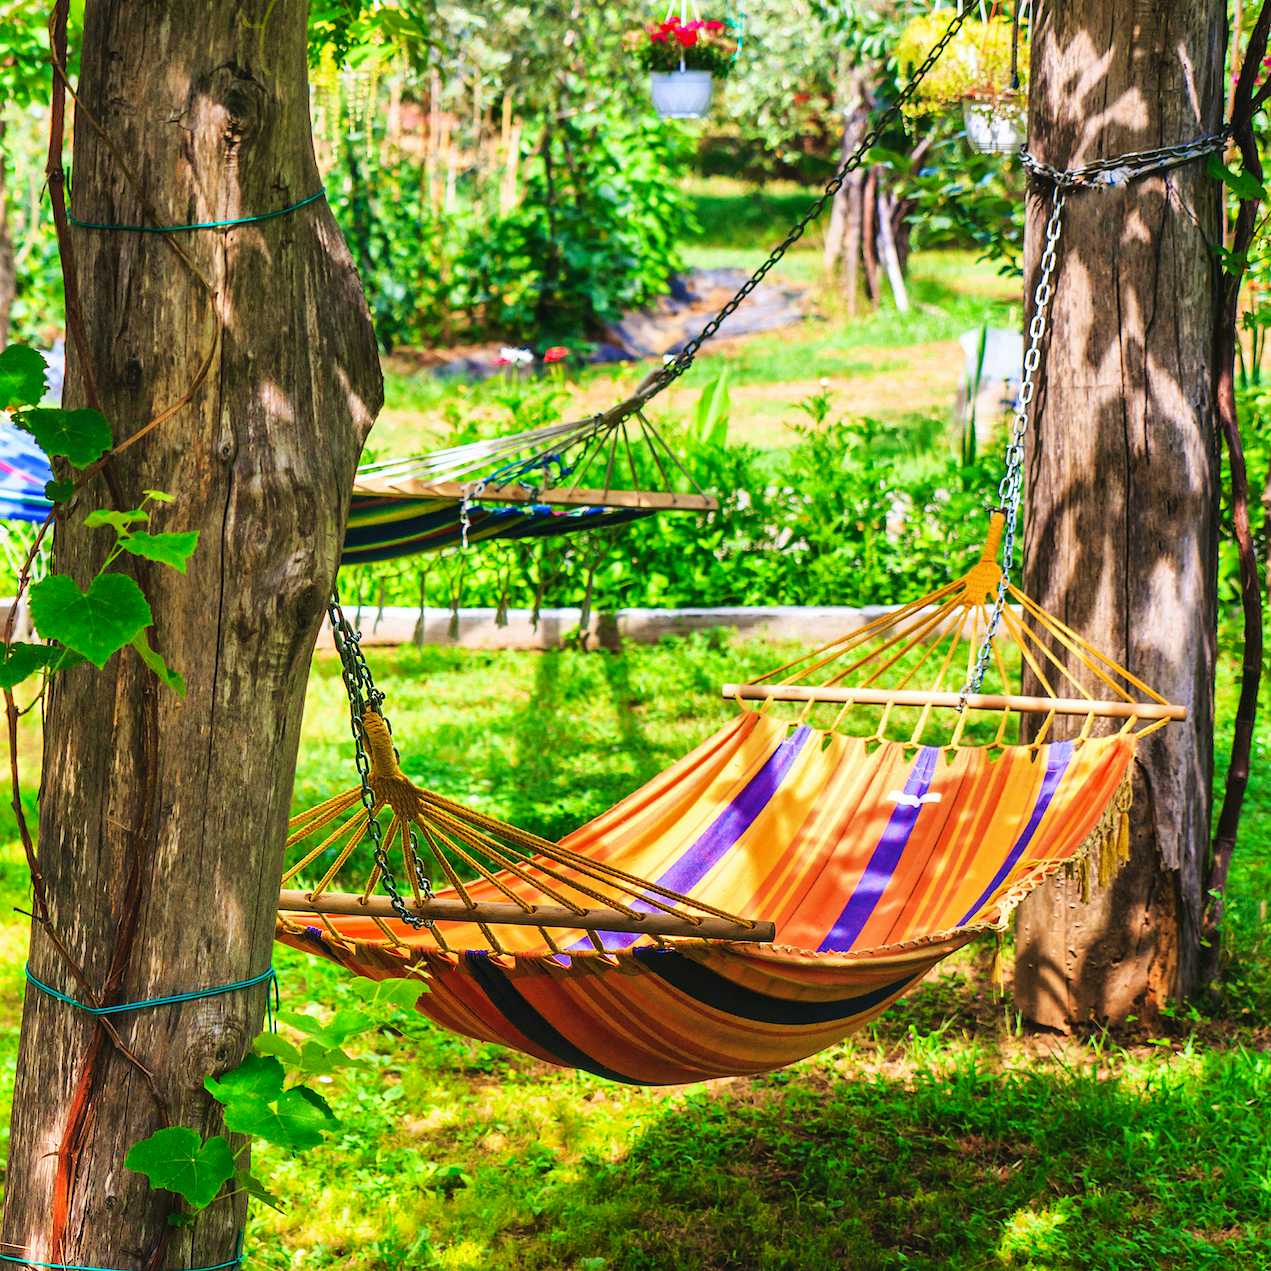 Photo Caption: Relax in the hammock while reading a book, or take a nap